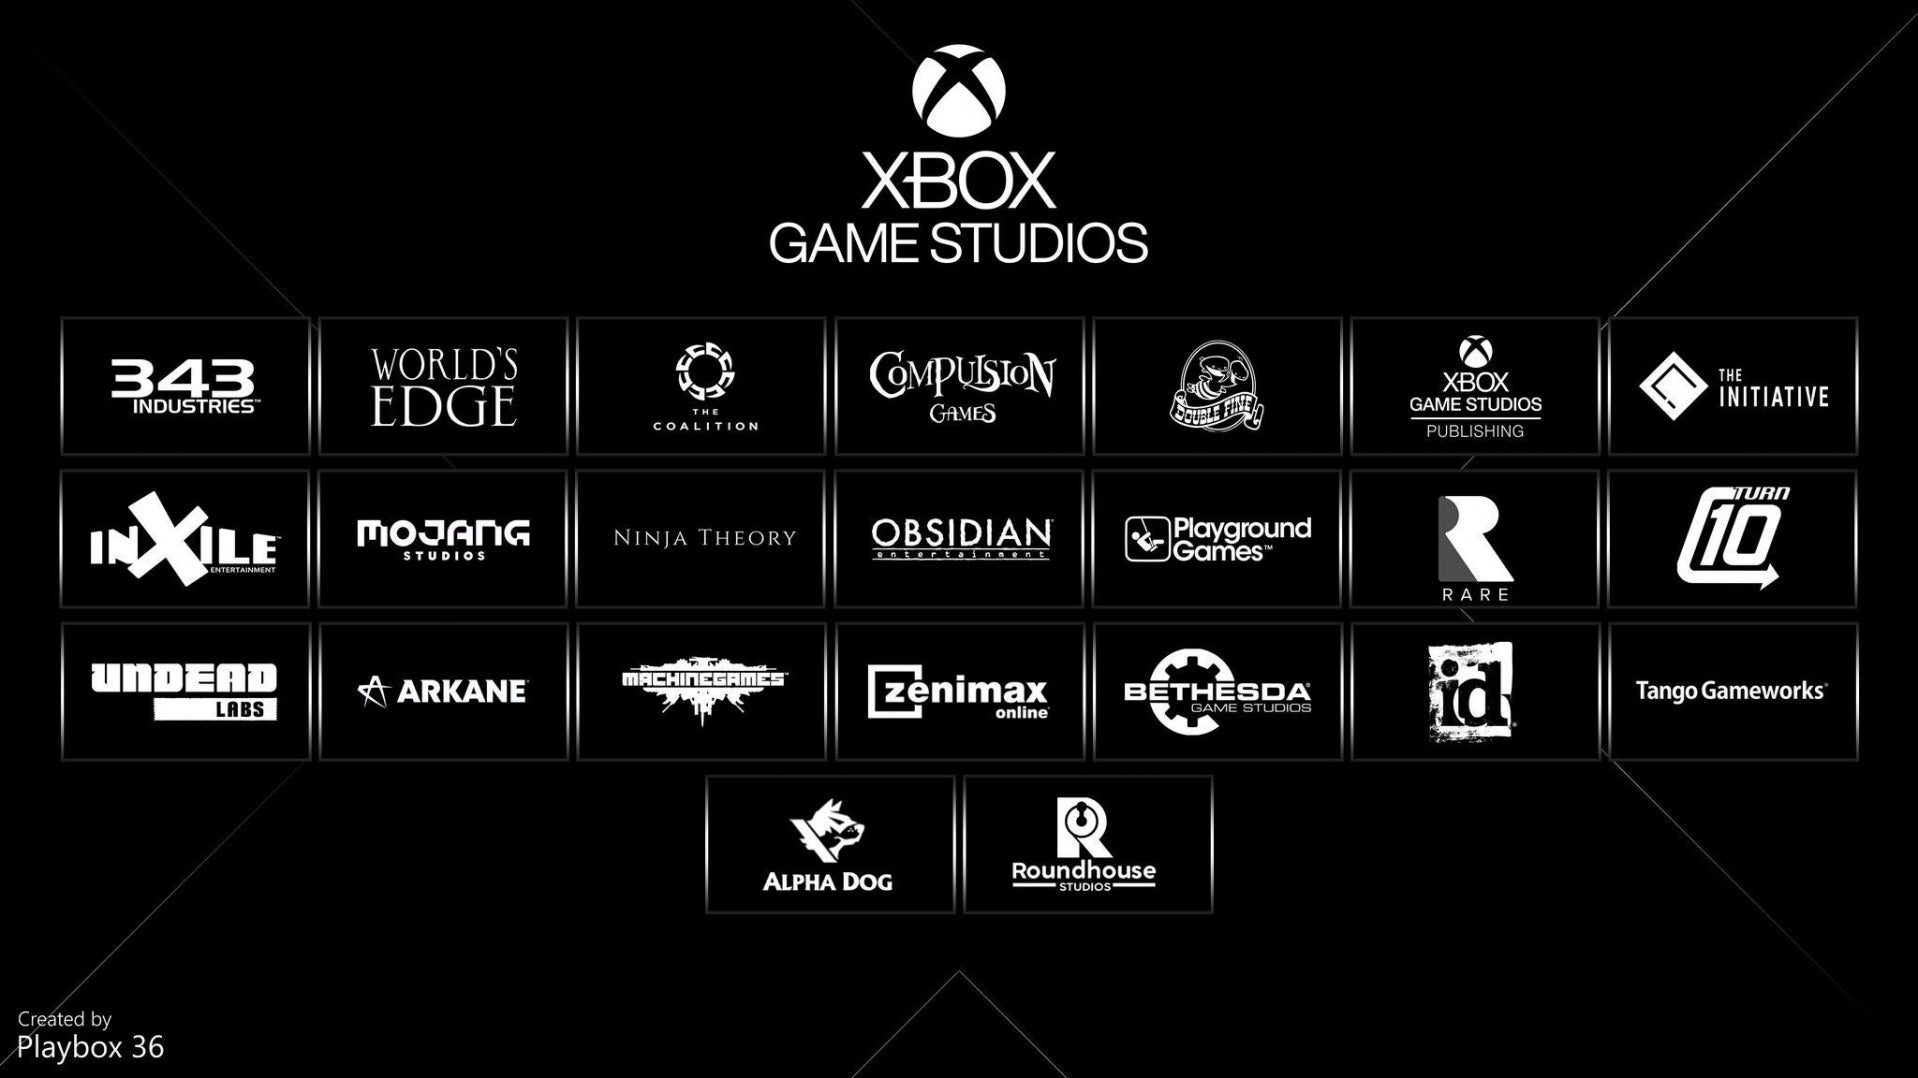 How Many Game Studios Does Microsoft Own?